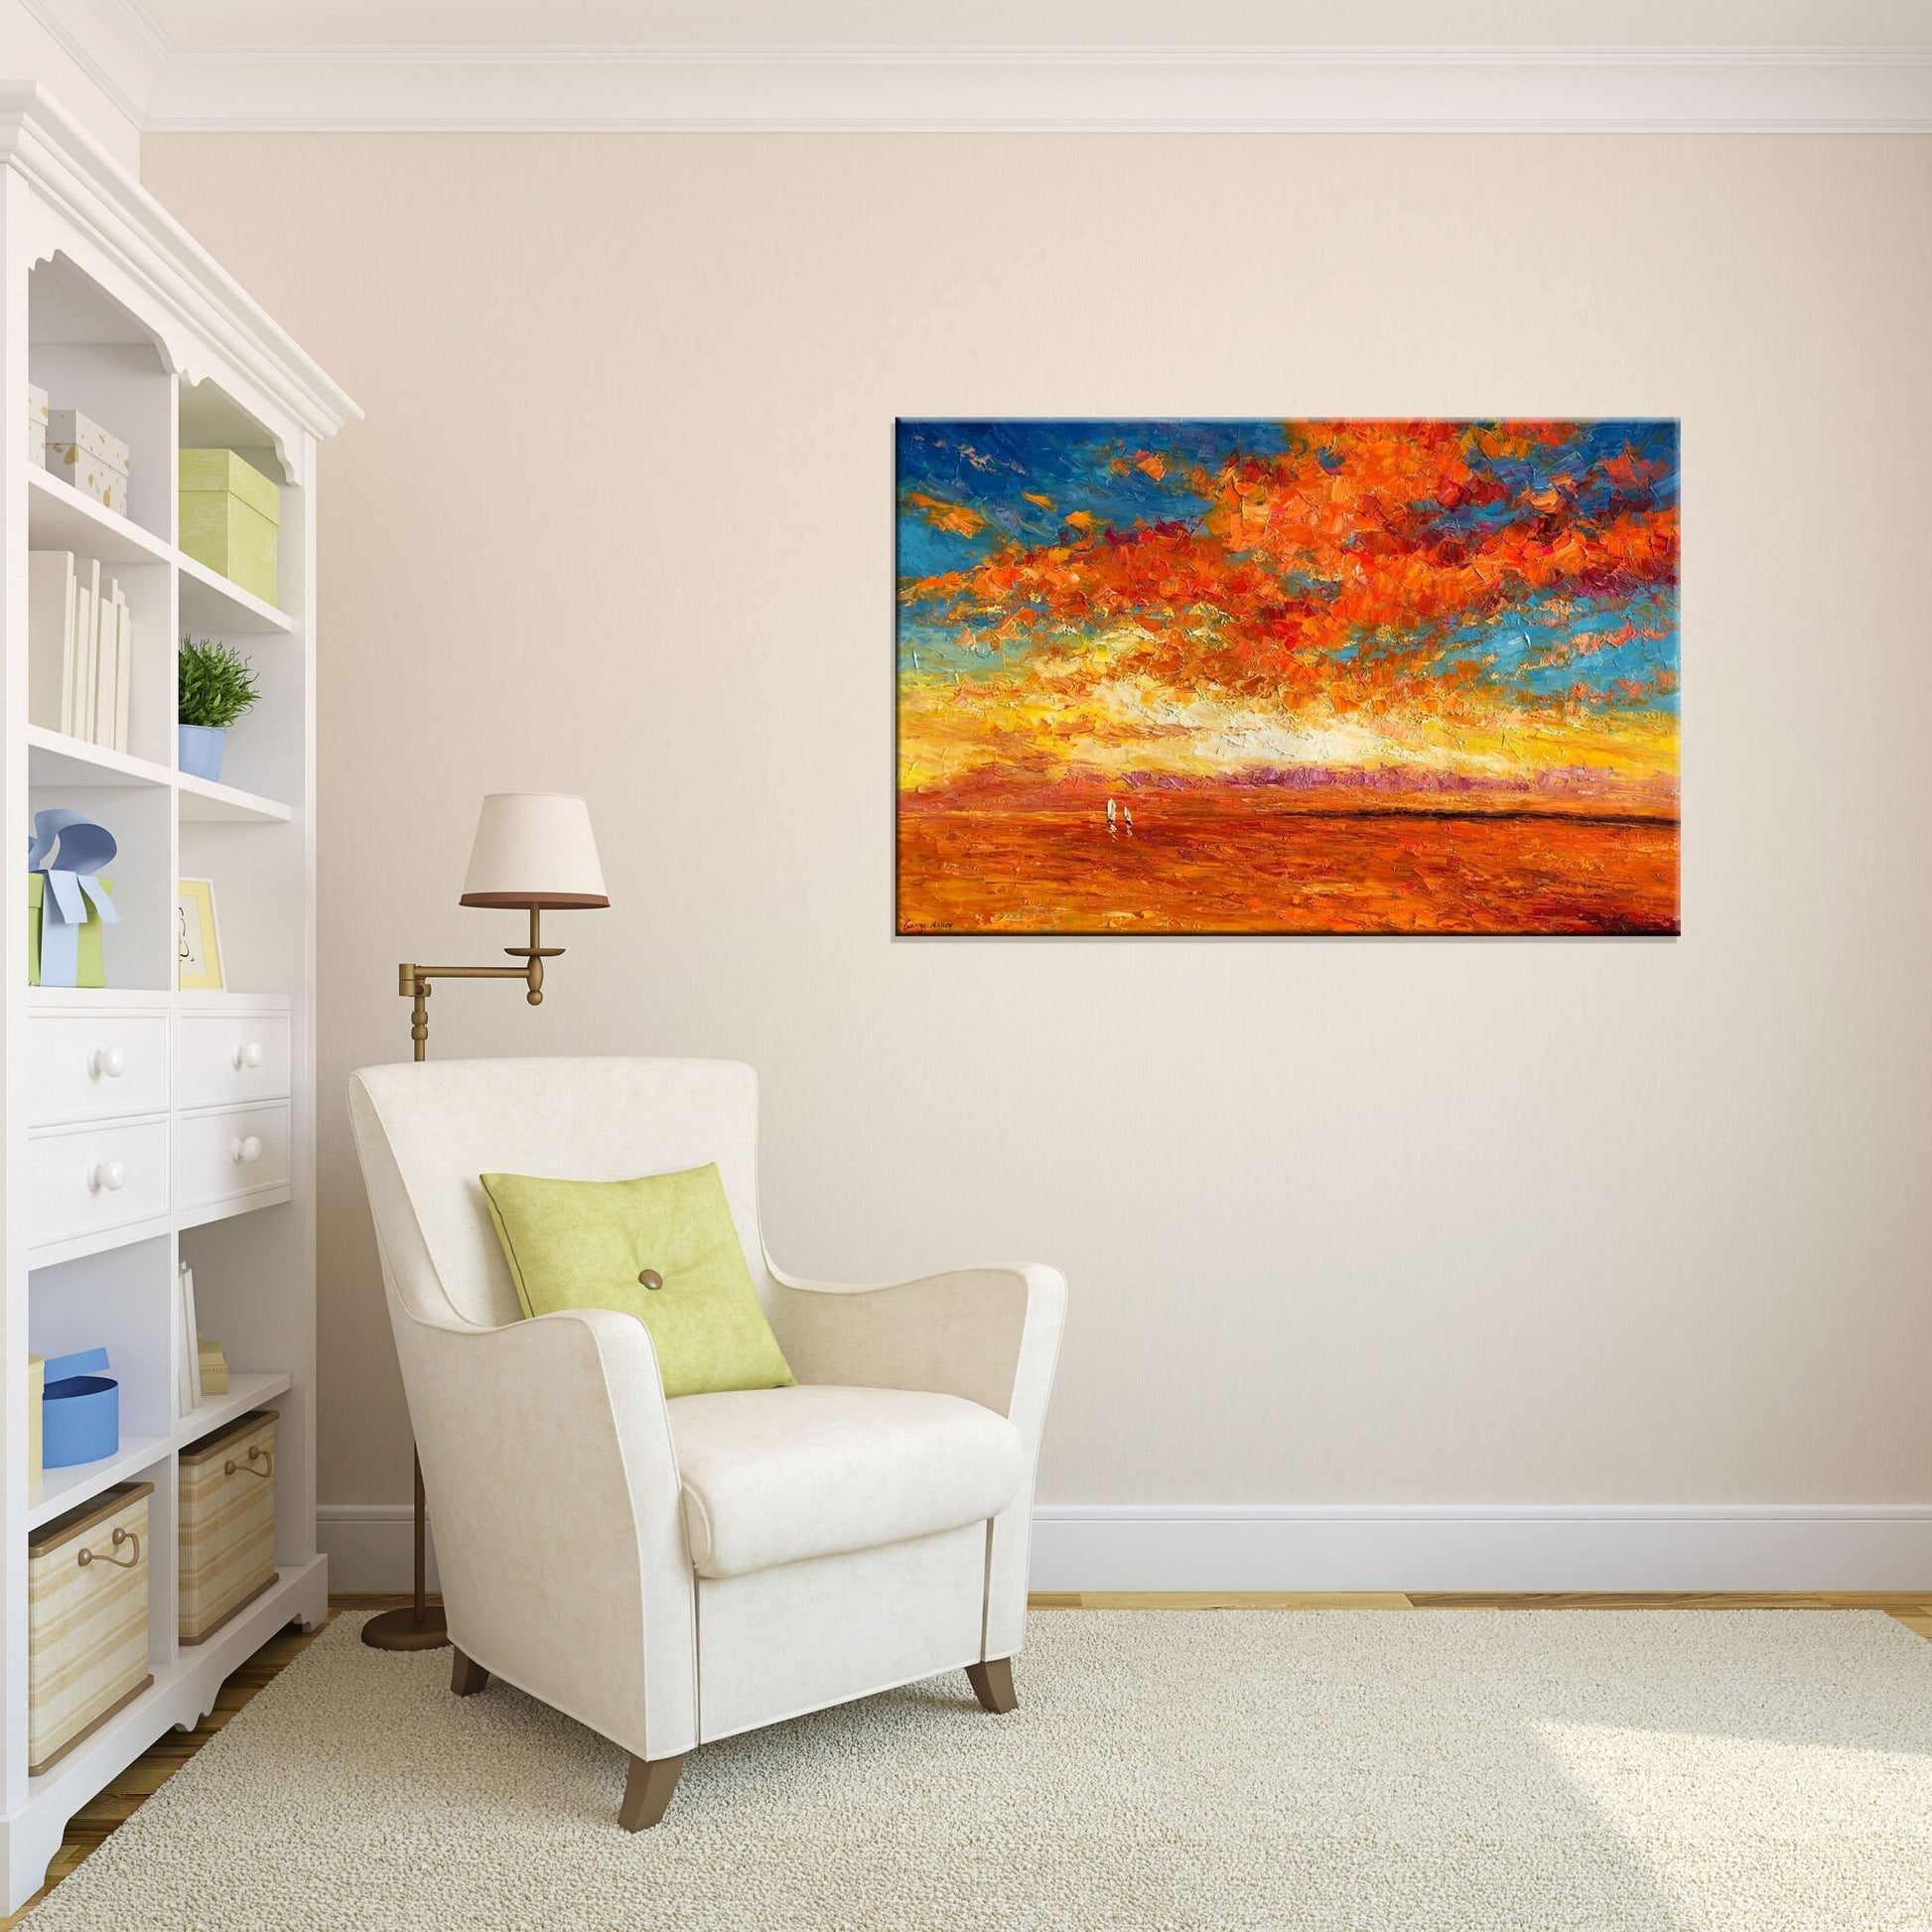 Pacific Sunset Oil Painting - Original Seascape Art - Fine Wall Decor - Oversized Canvas - Ready to Hang